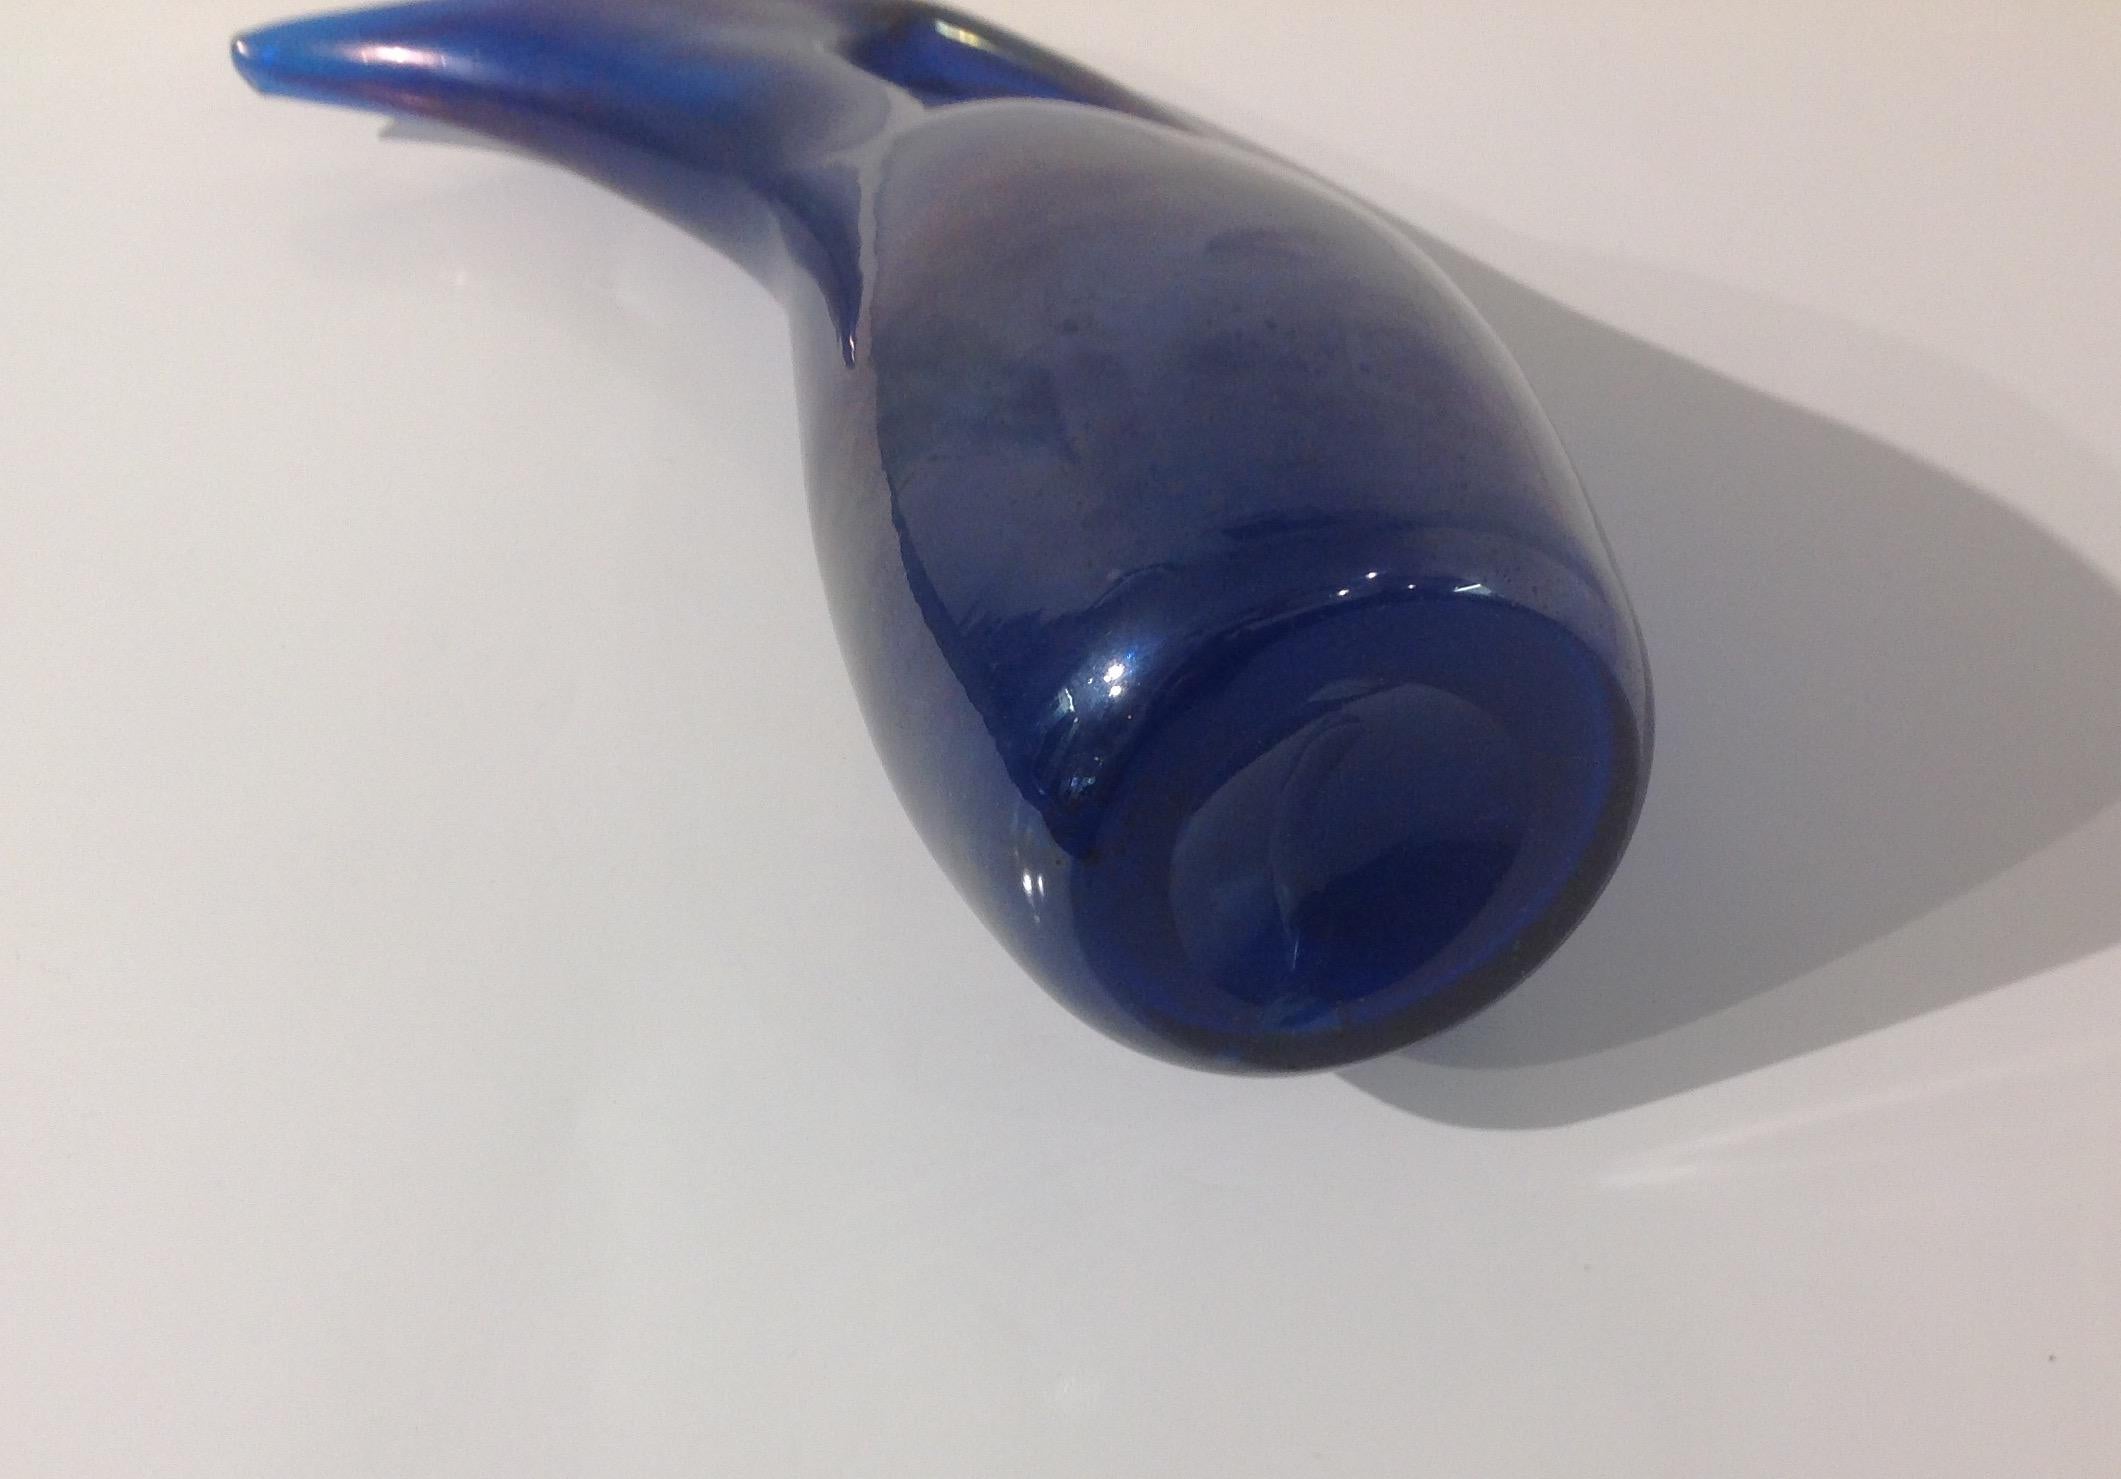 AVeM Anse Volante Murano glass vase in irridized vibrant blue In Good Condition For Sale In Keego Harbor, MI